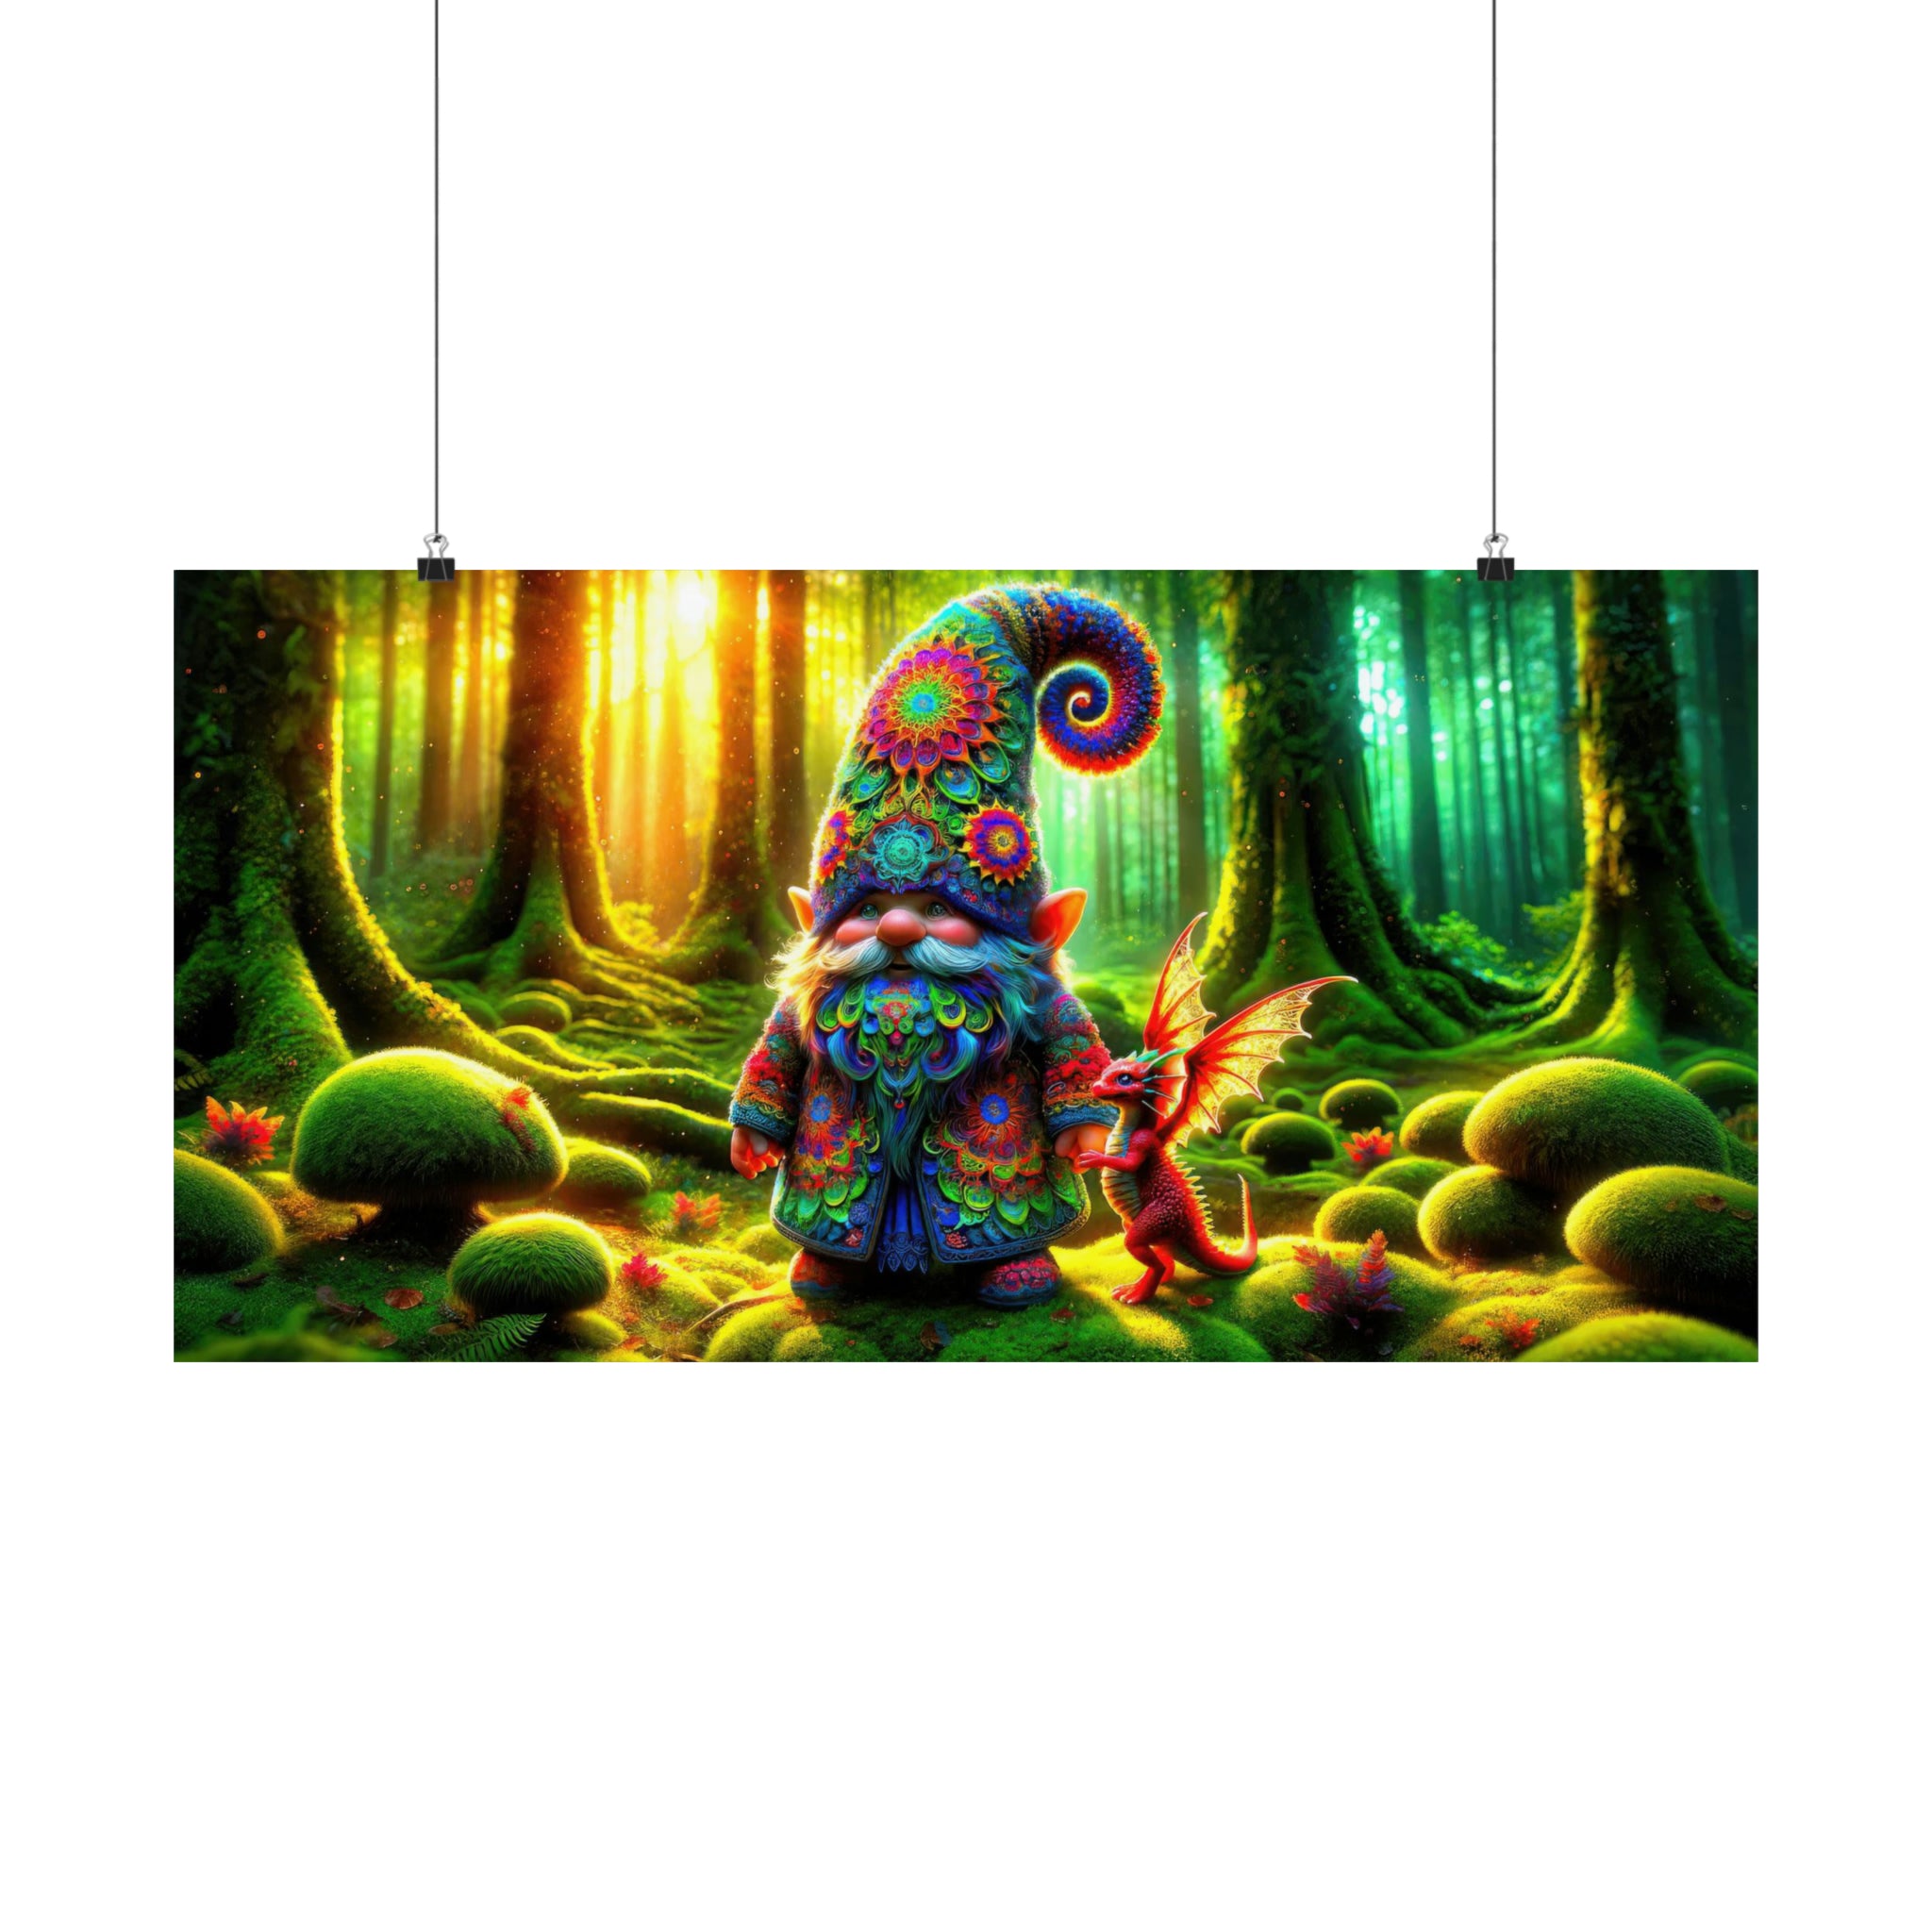 The Gnome's Morning in Enchanted Woods Poster